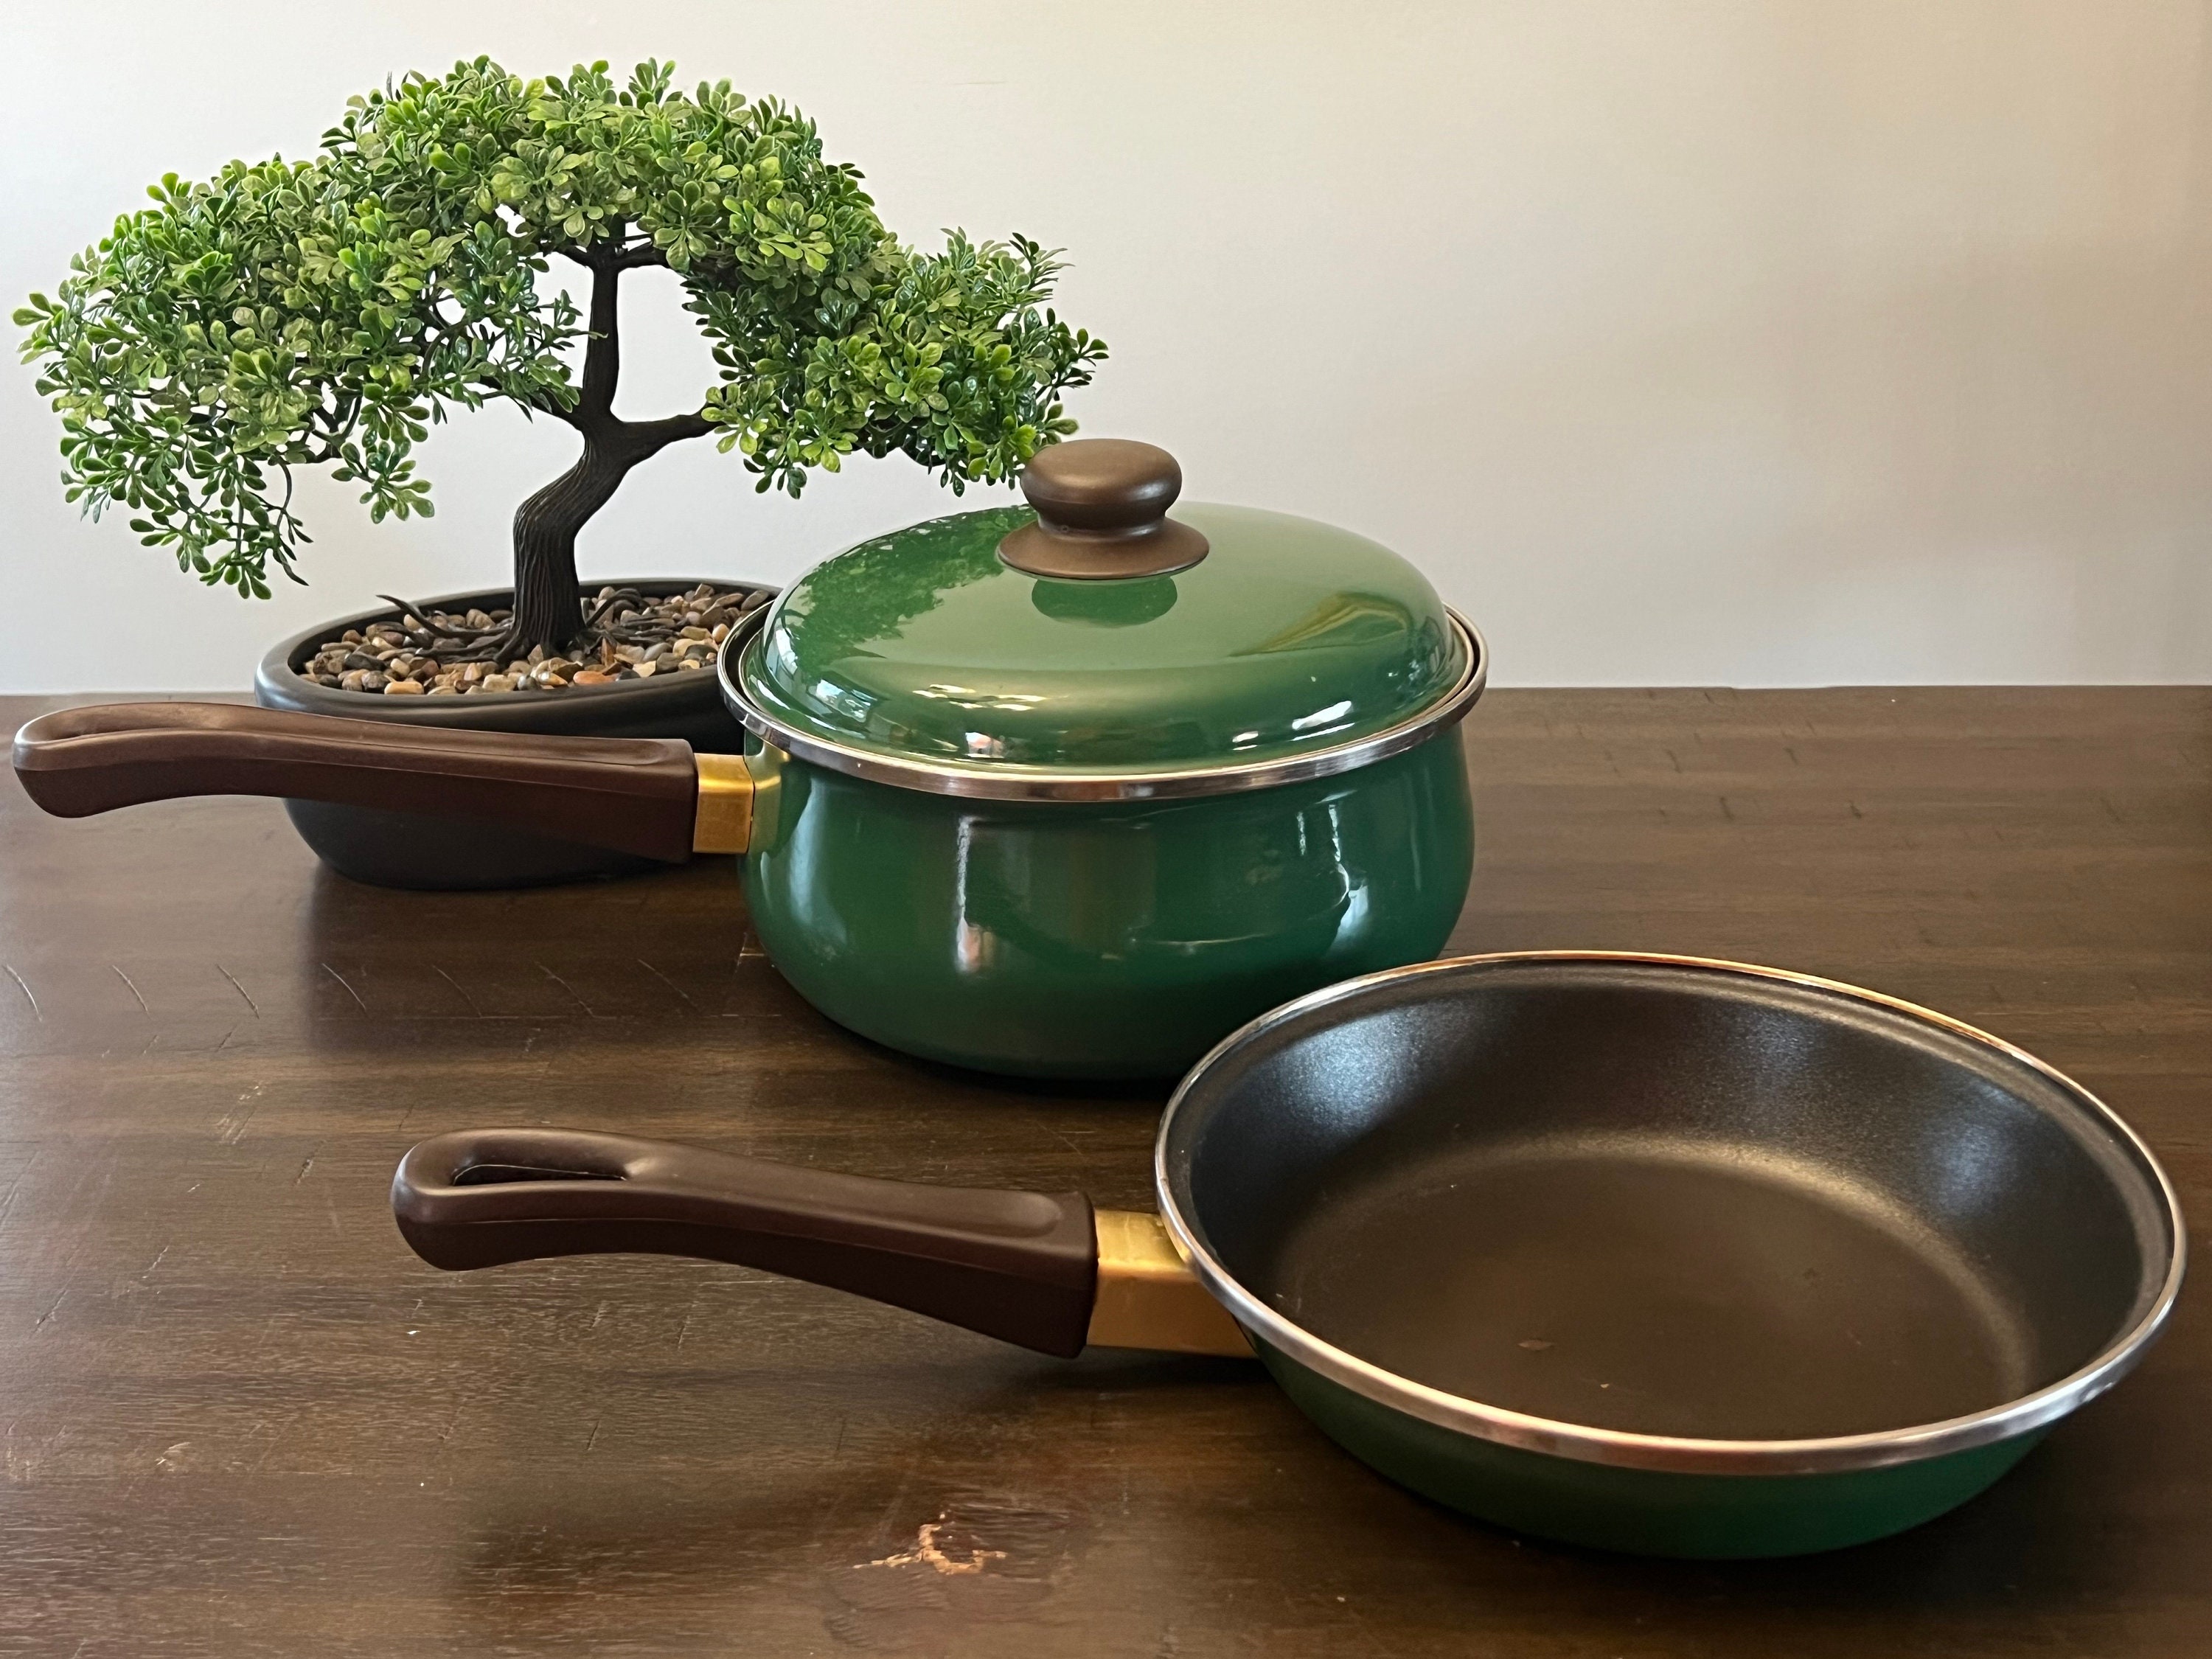 Encore Enameled Green Non Stick Cookware 3 Piece Set. 3 Quart Sauce Pan  With Lid & 8 Frying Pan. Lid Fits Both. Made in Spain. 